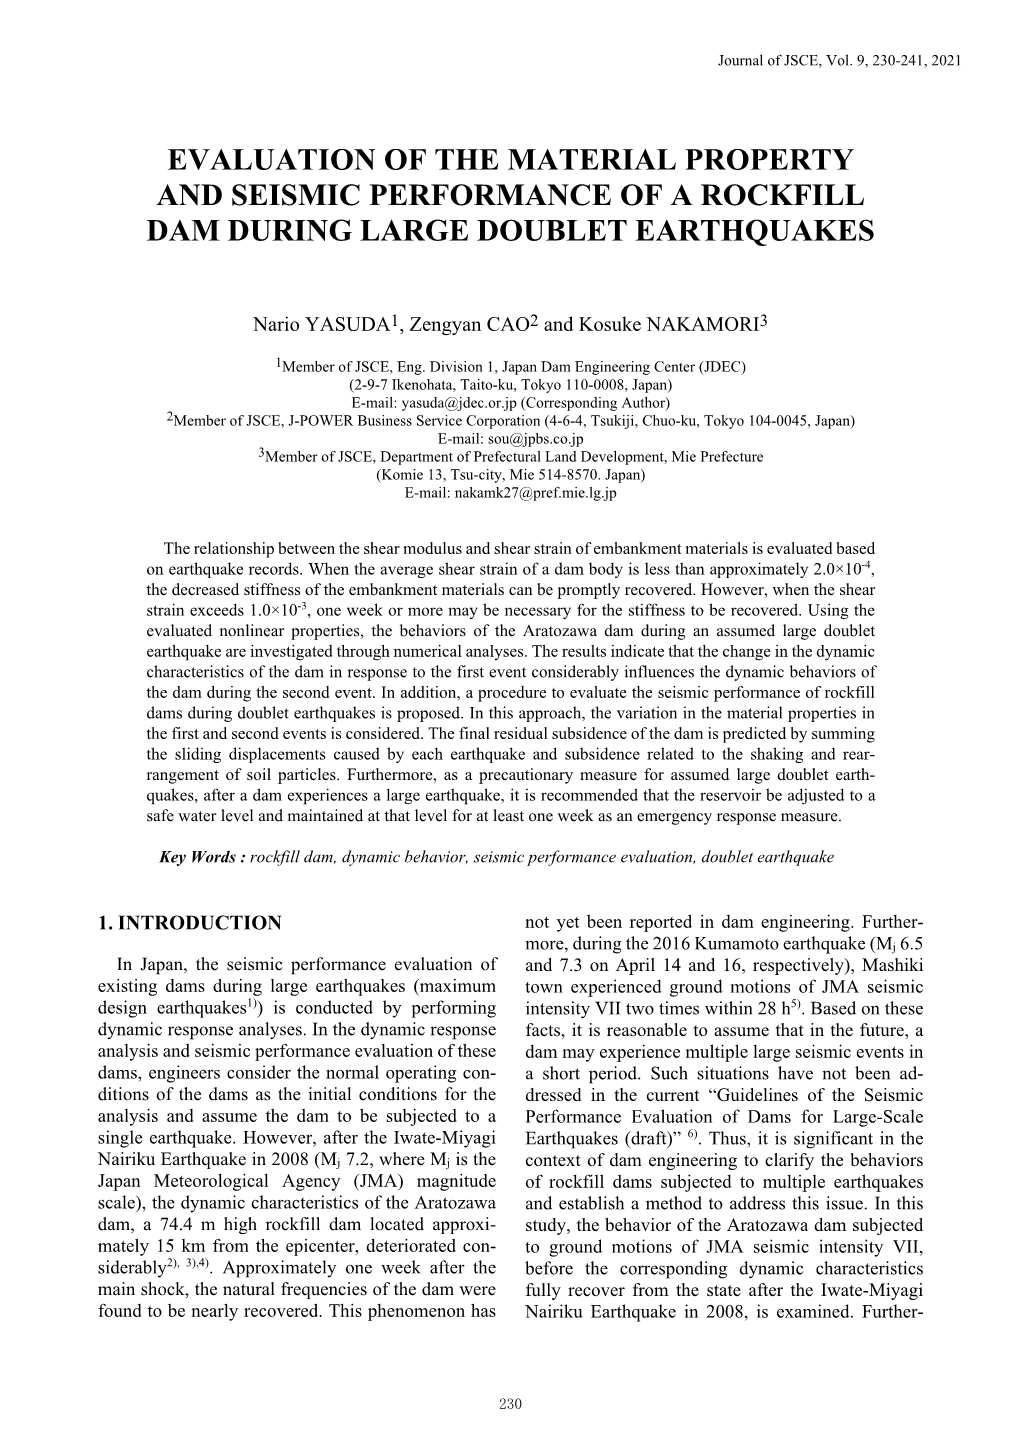 Evaluation of the Material Property and Seismic Performance of a Rockfill Dam During Large Doublet Earthquakes